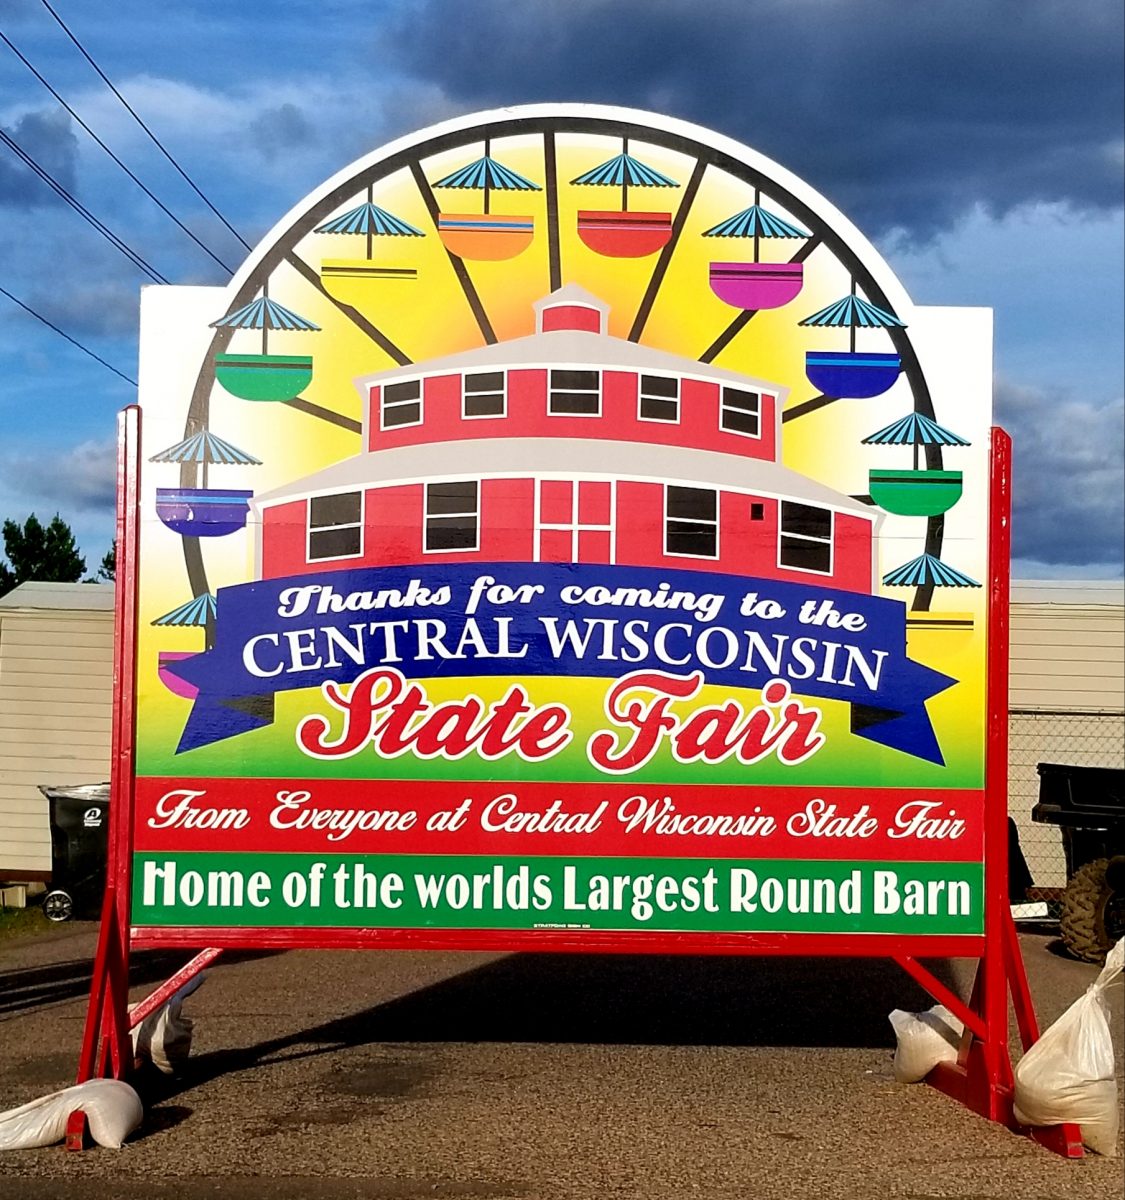 Day two of the Central Wisconsin State Fair Hub City Times